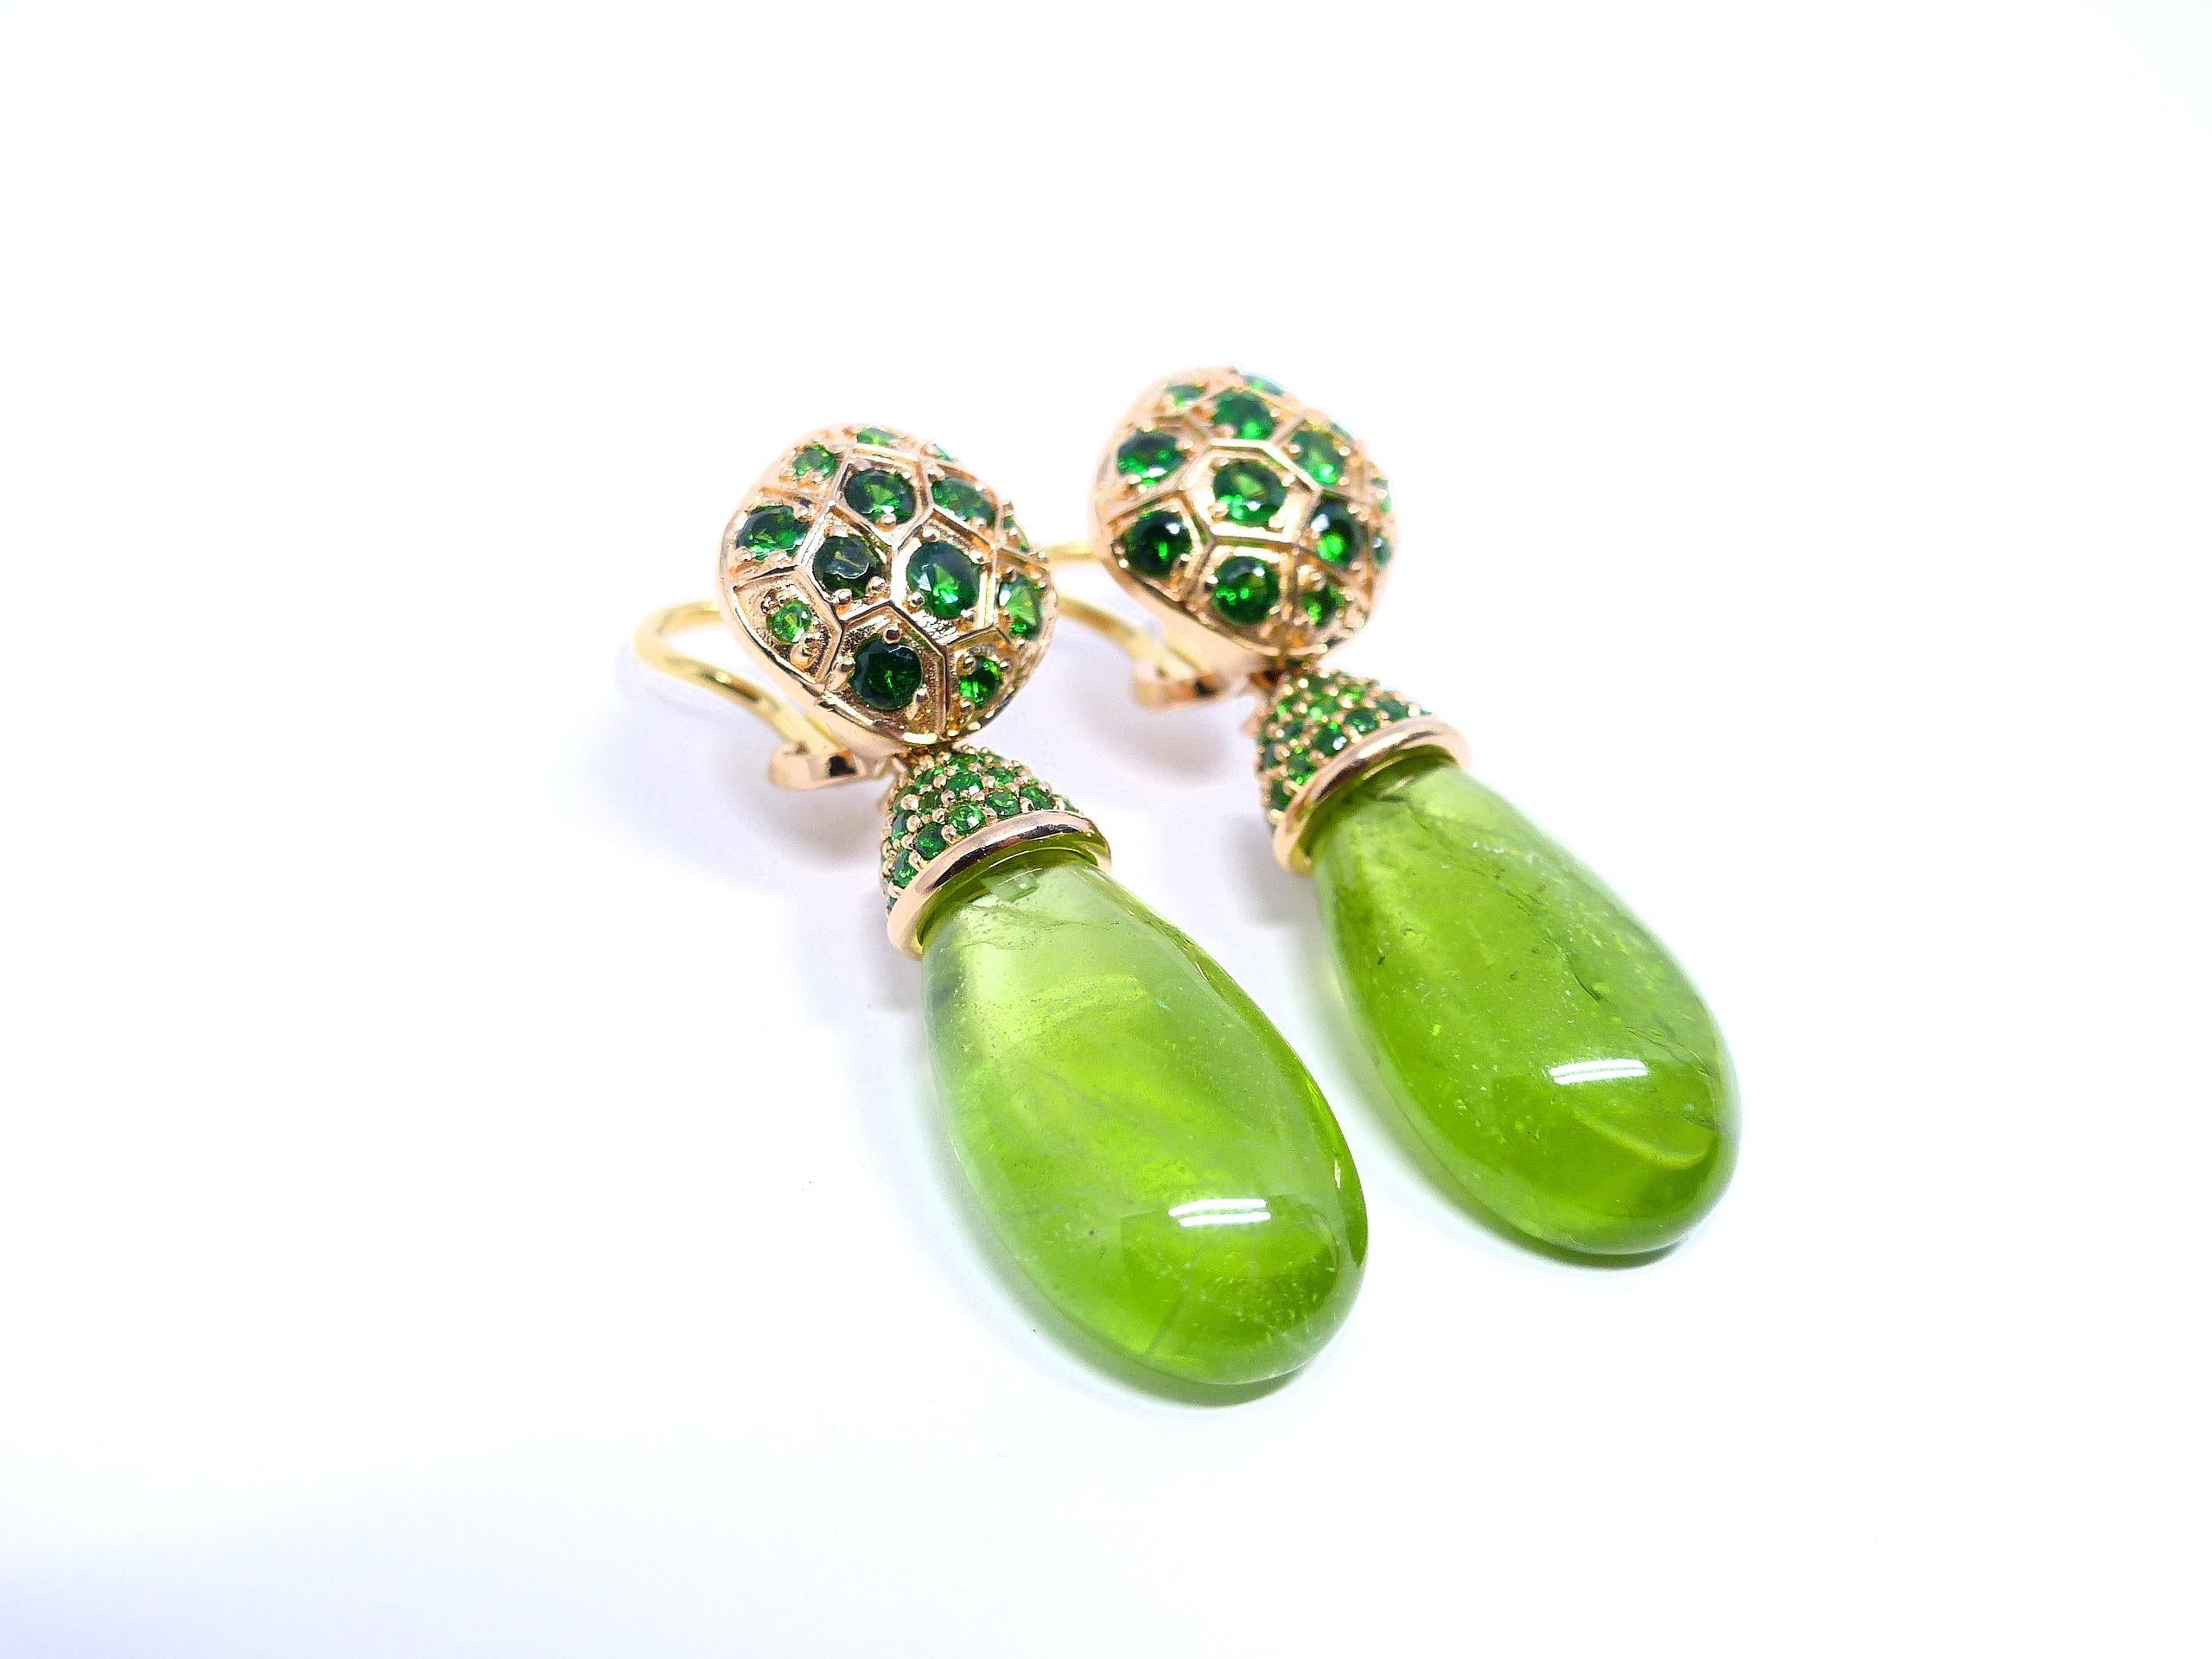 Thomas Leyser is renowned for his contemporary jewellery designs utilizing fine gemstones.

These 18k red gold (11.80g) pair of earrings are set with 2x fine Peridots in magnificient green colour (briolette-cut, 25x13x7.5mm, 42.19ct) + 96x